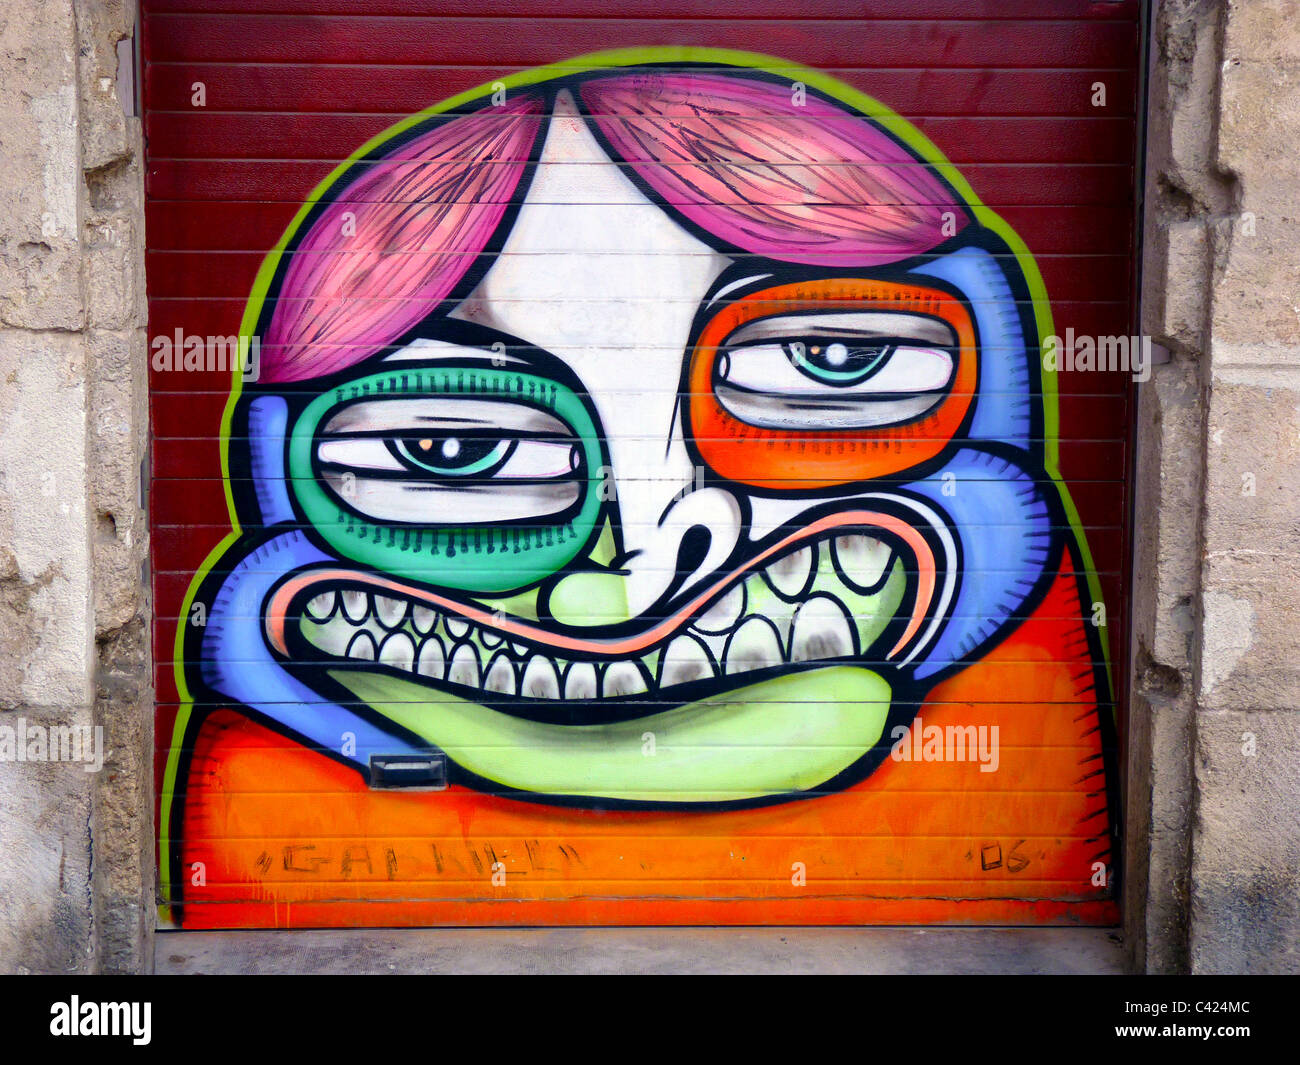 Urban art: Graffiti painted on private doorway in Valencia Spain Stock Photo